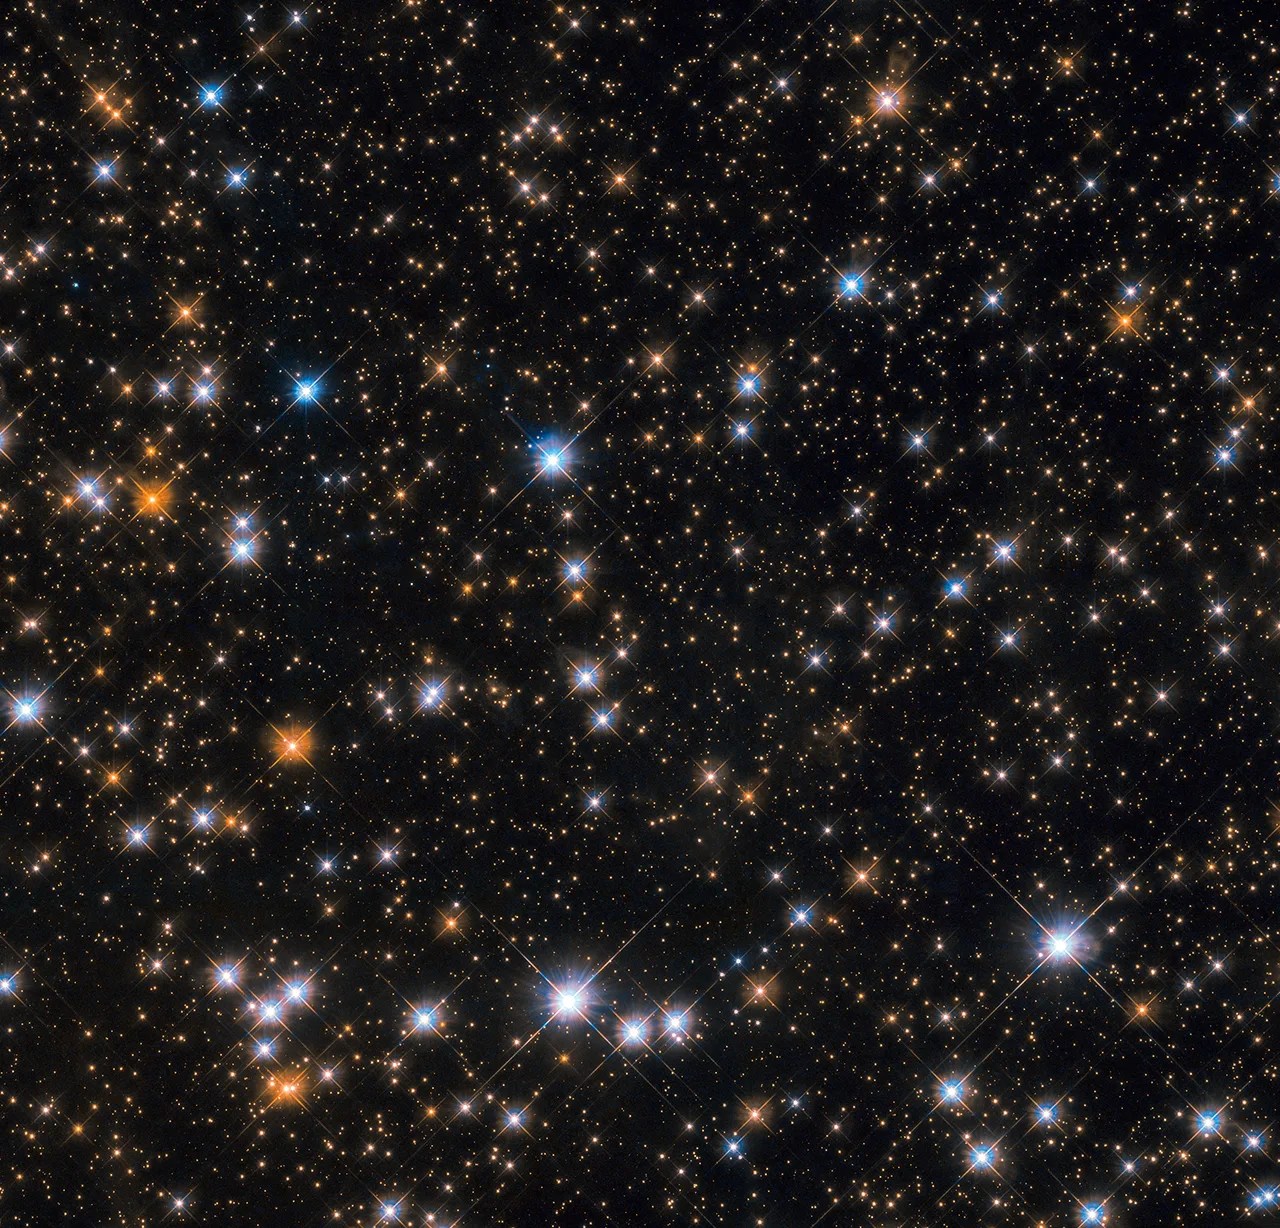 Hubble image of messier 11